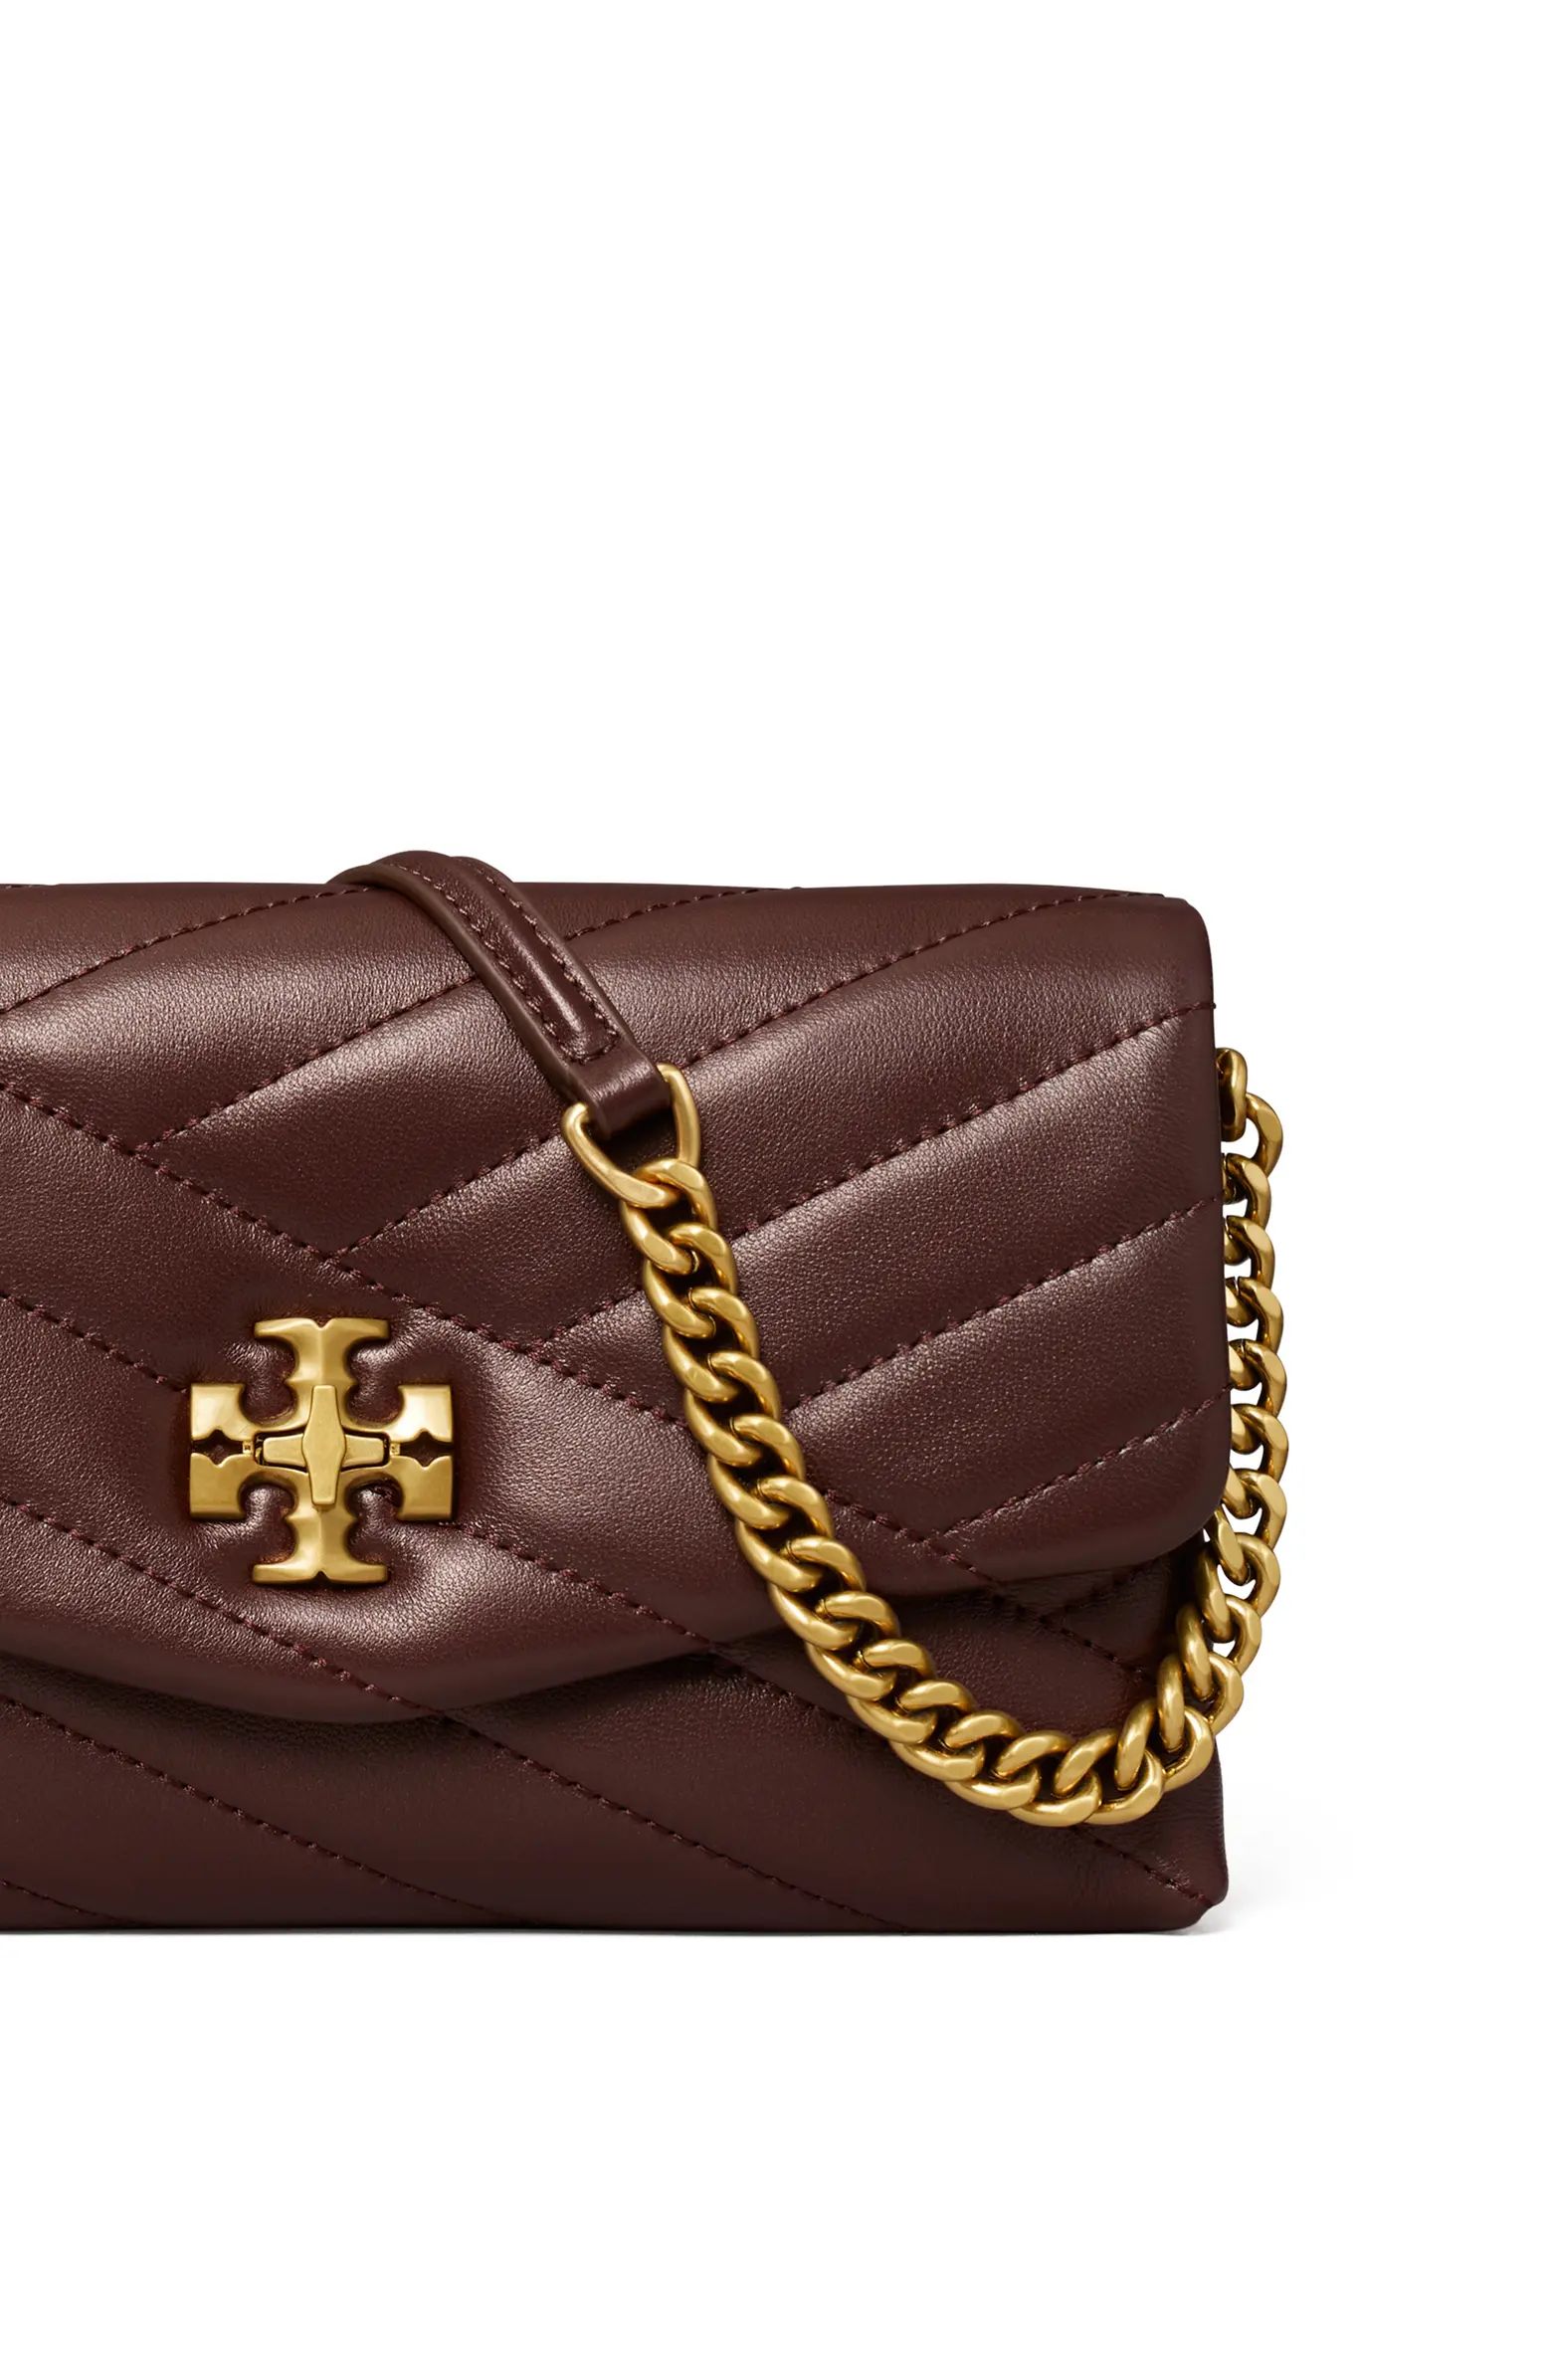 Kira Chevron Quilted Leather Wallet on a Chain | Nordstrom